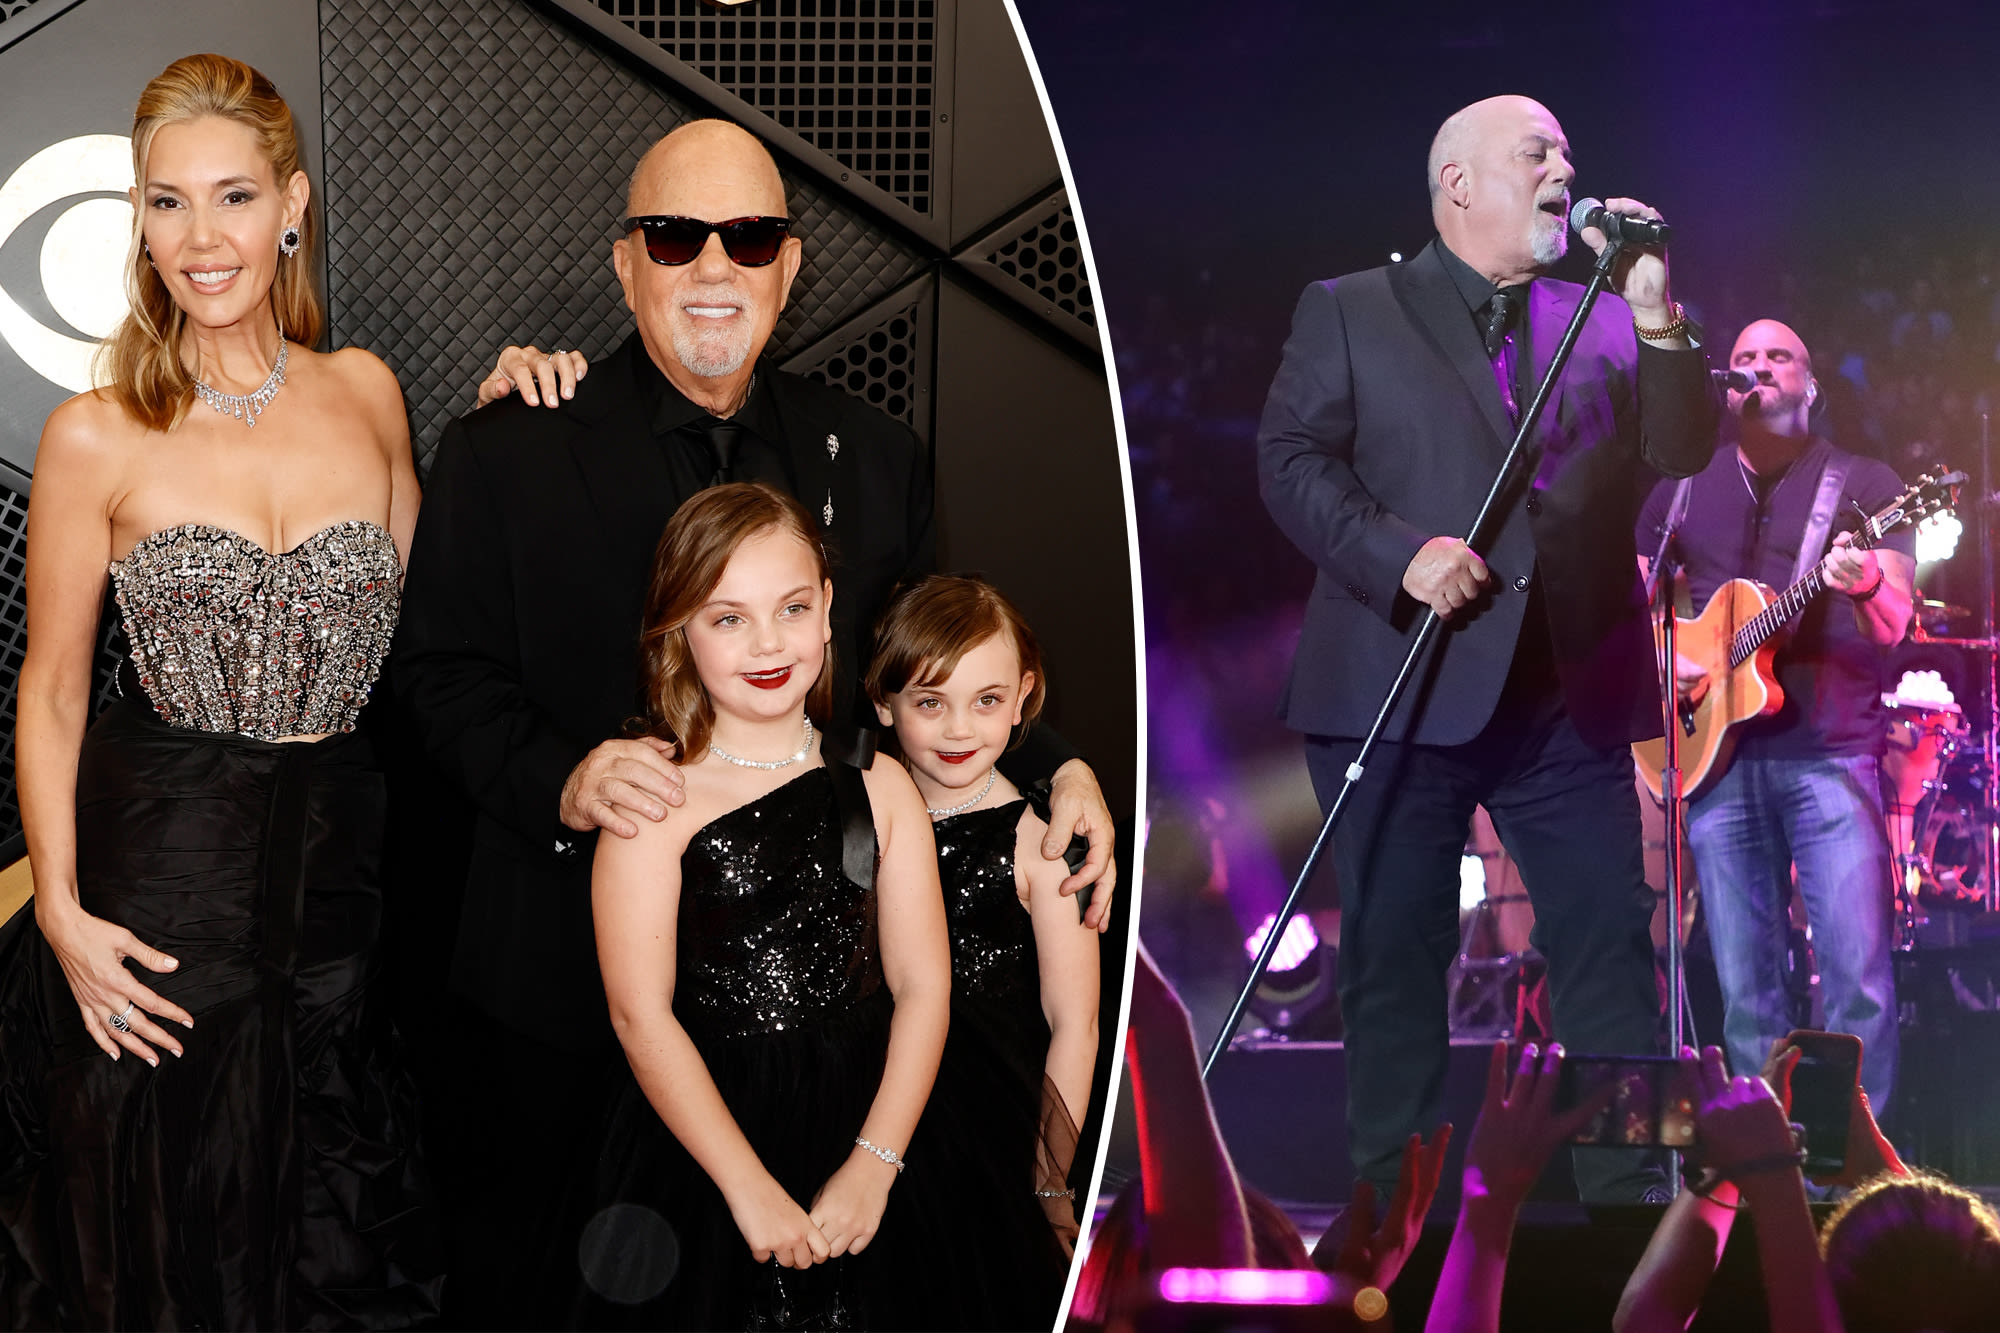 Billy Joel’s family guide: Meet his daughters, wife and exes